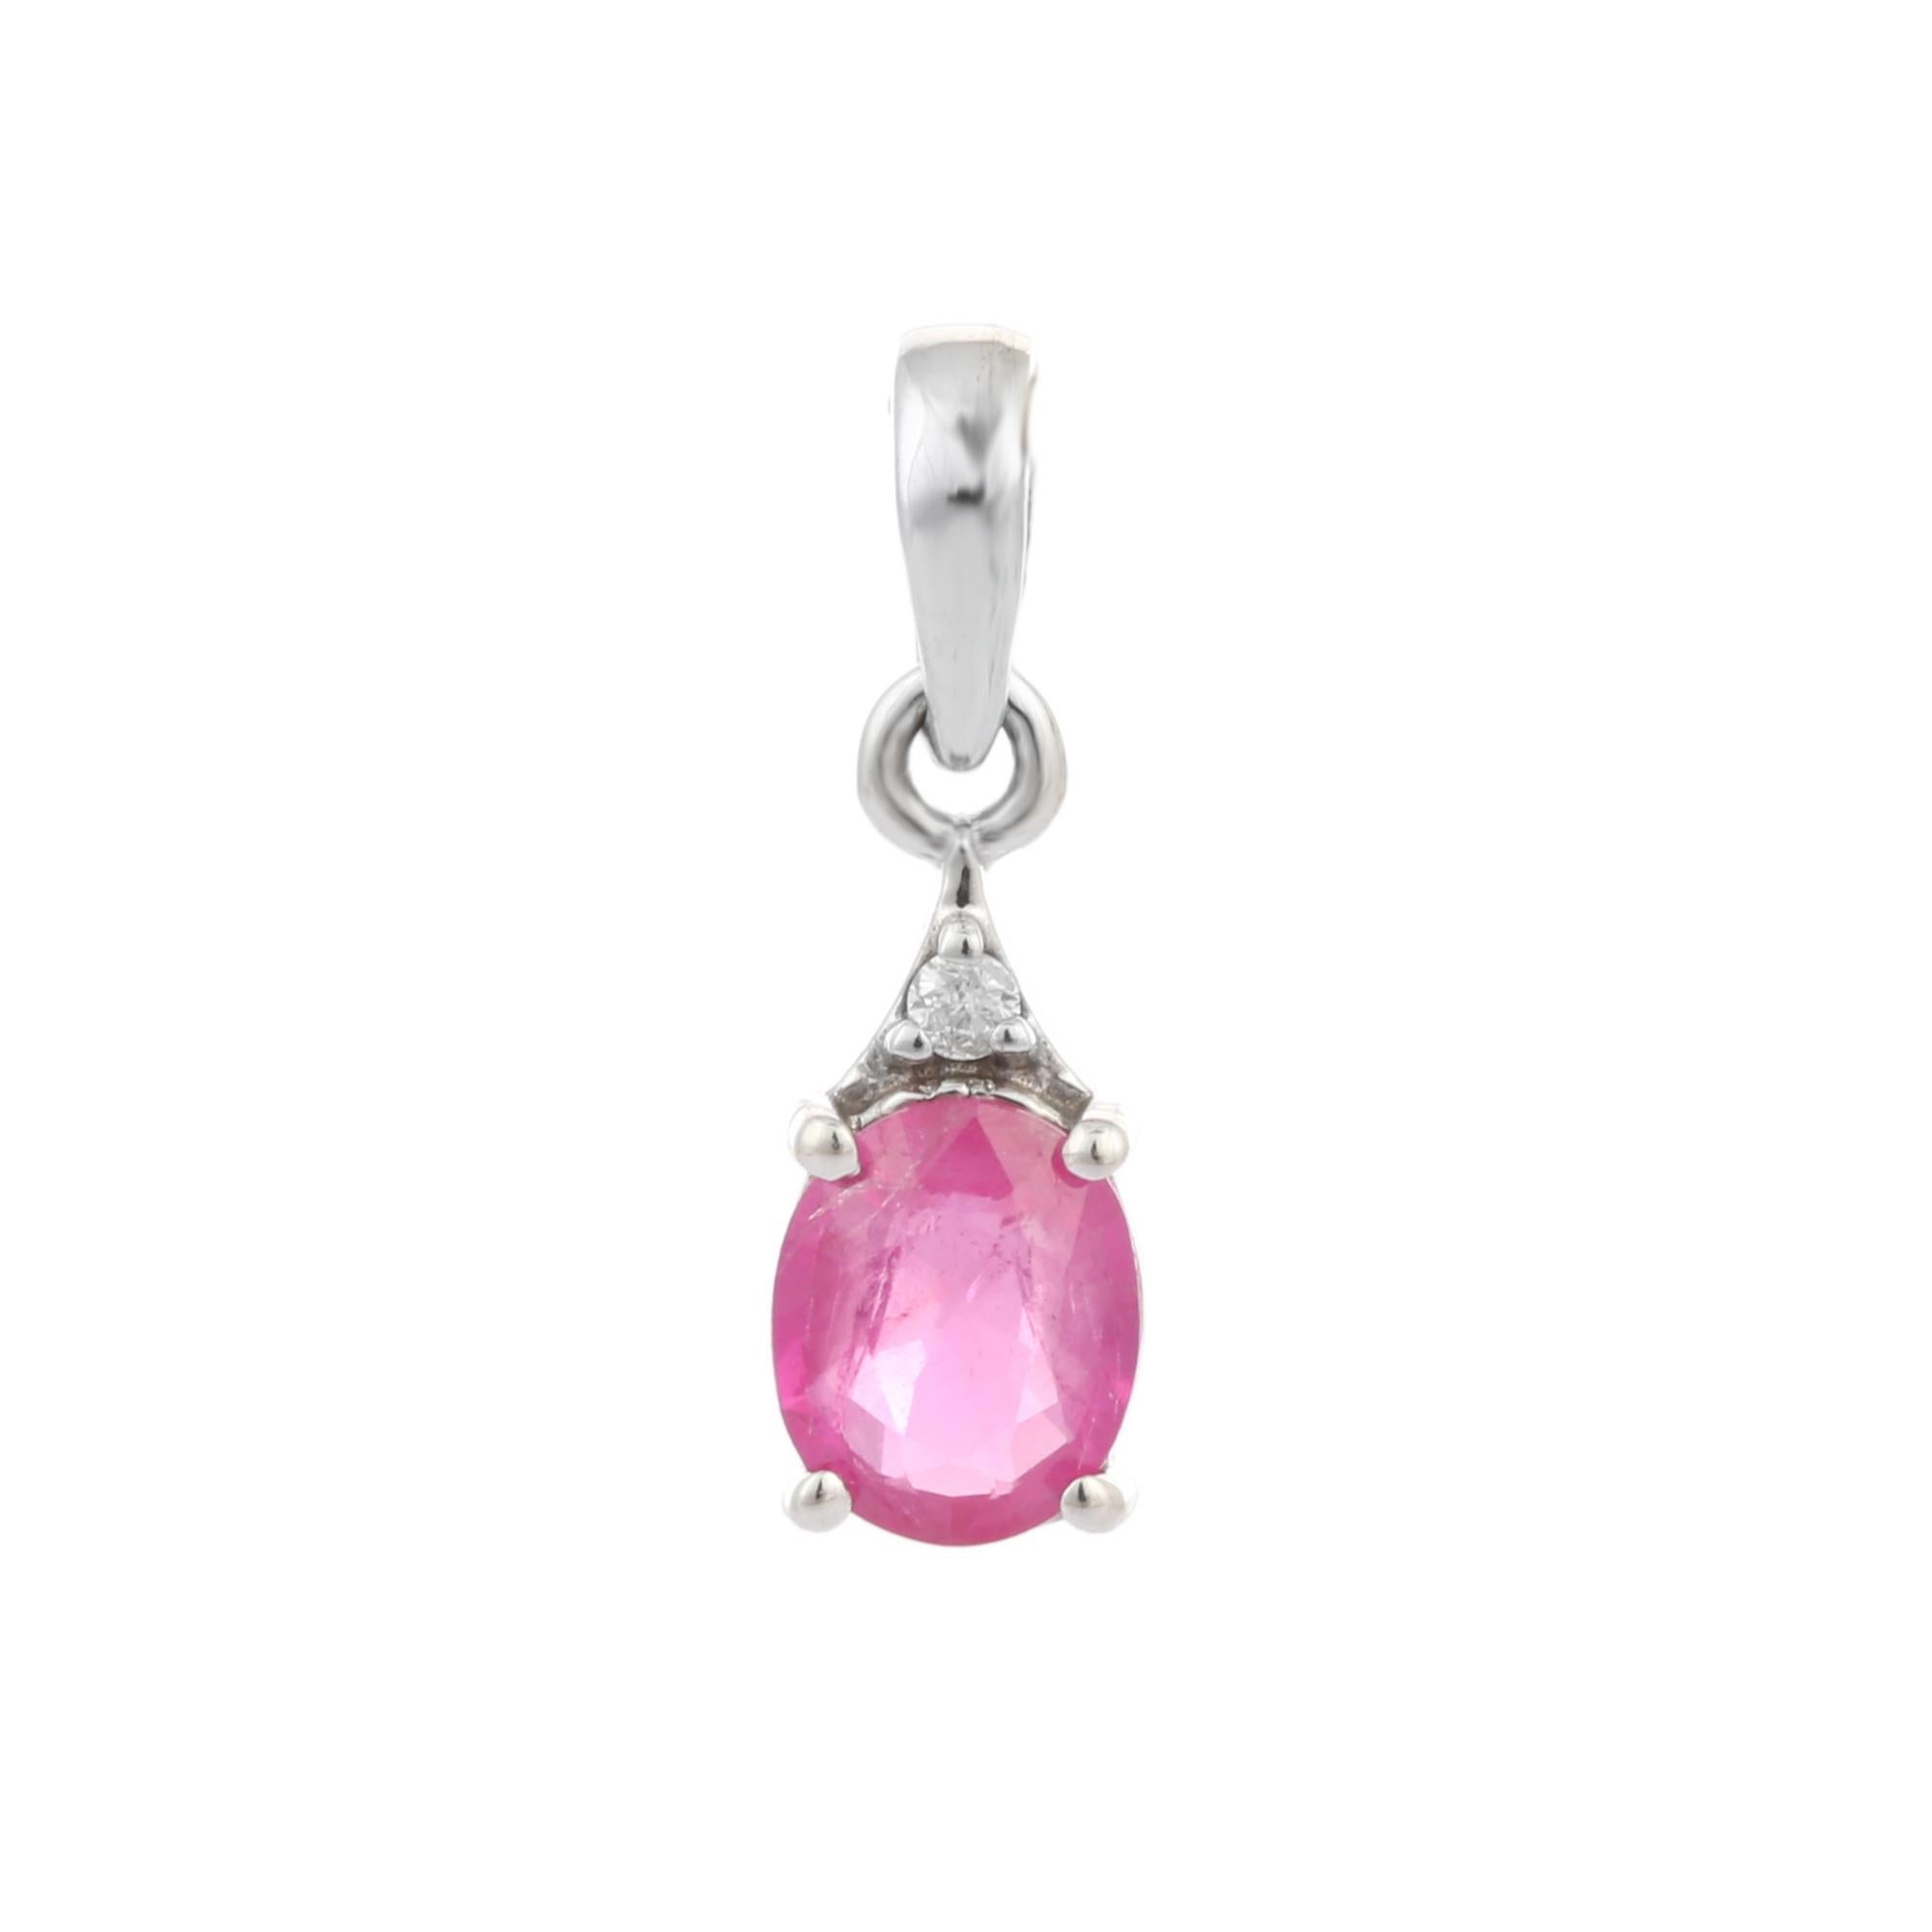 Ruby Pendant with Diamond in 14K Gold. It has a oval cut ruby with diamond that completes your look with a decent touch. Pendants are used to wear or gifted to represent love and promises. It's an attractive jewelry piece that goes with every basic